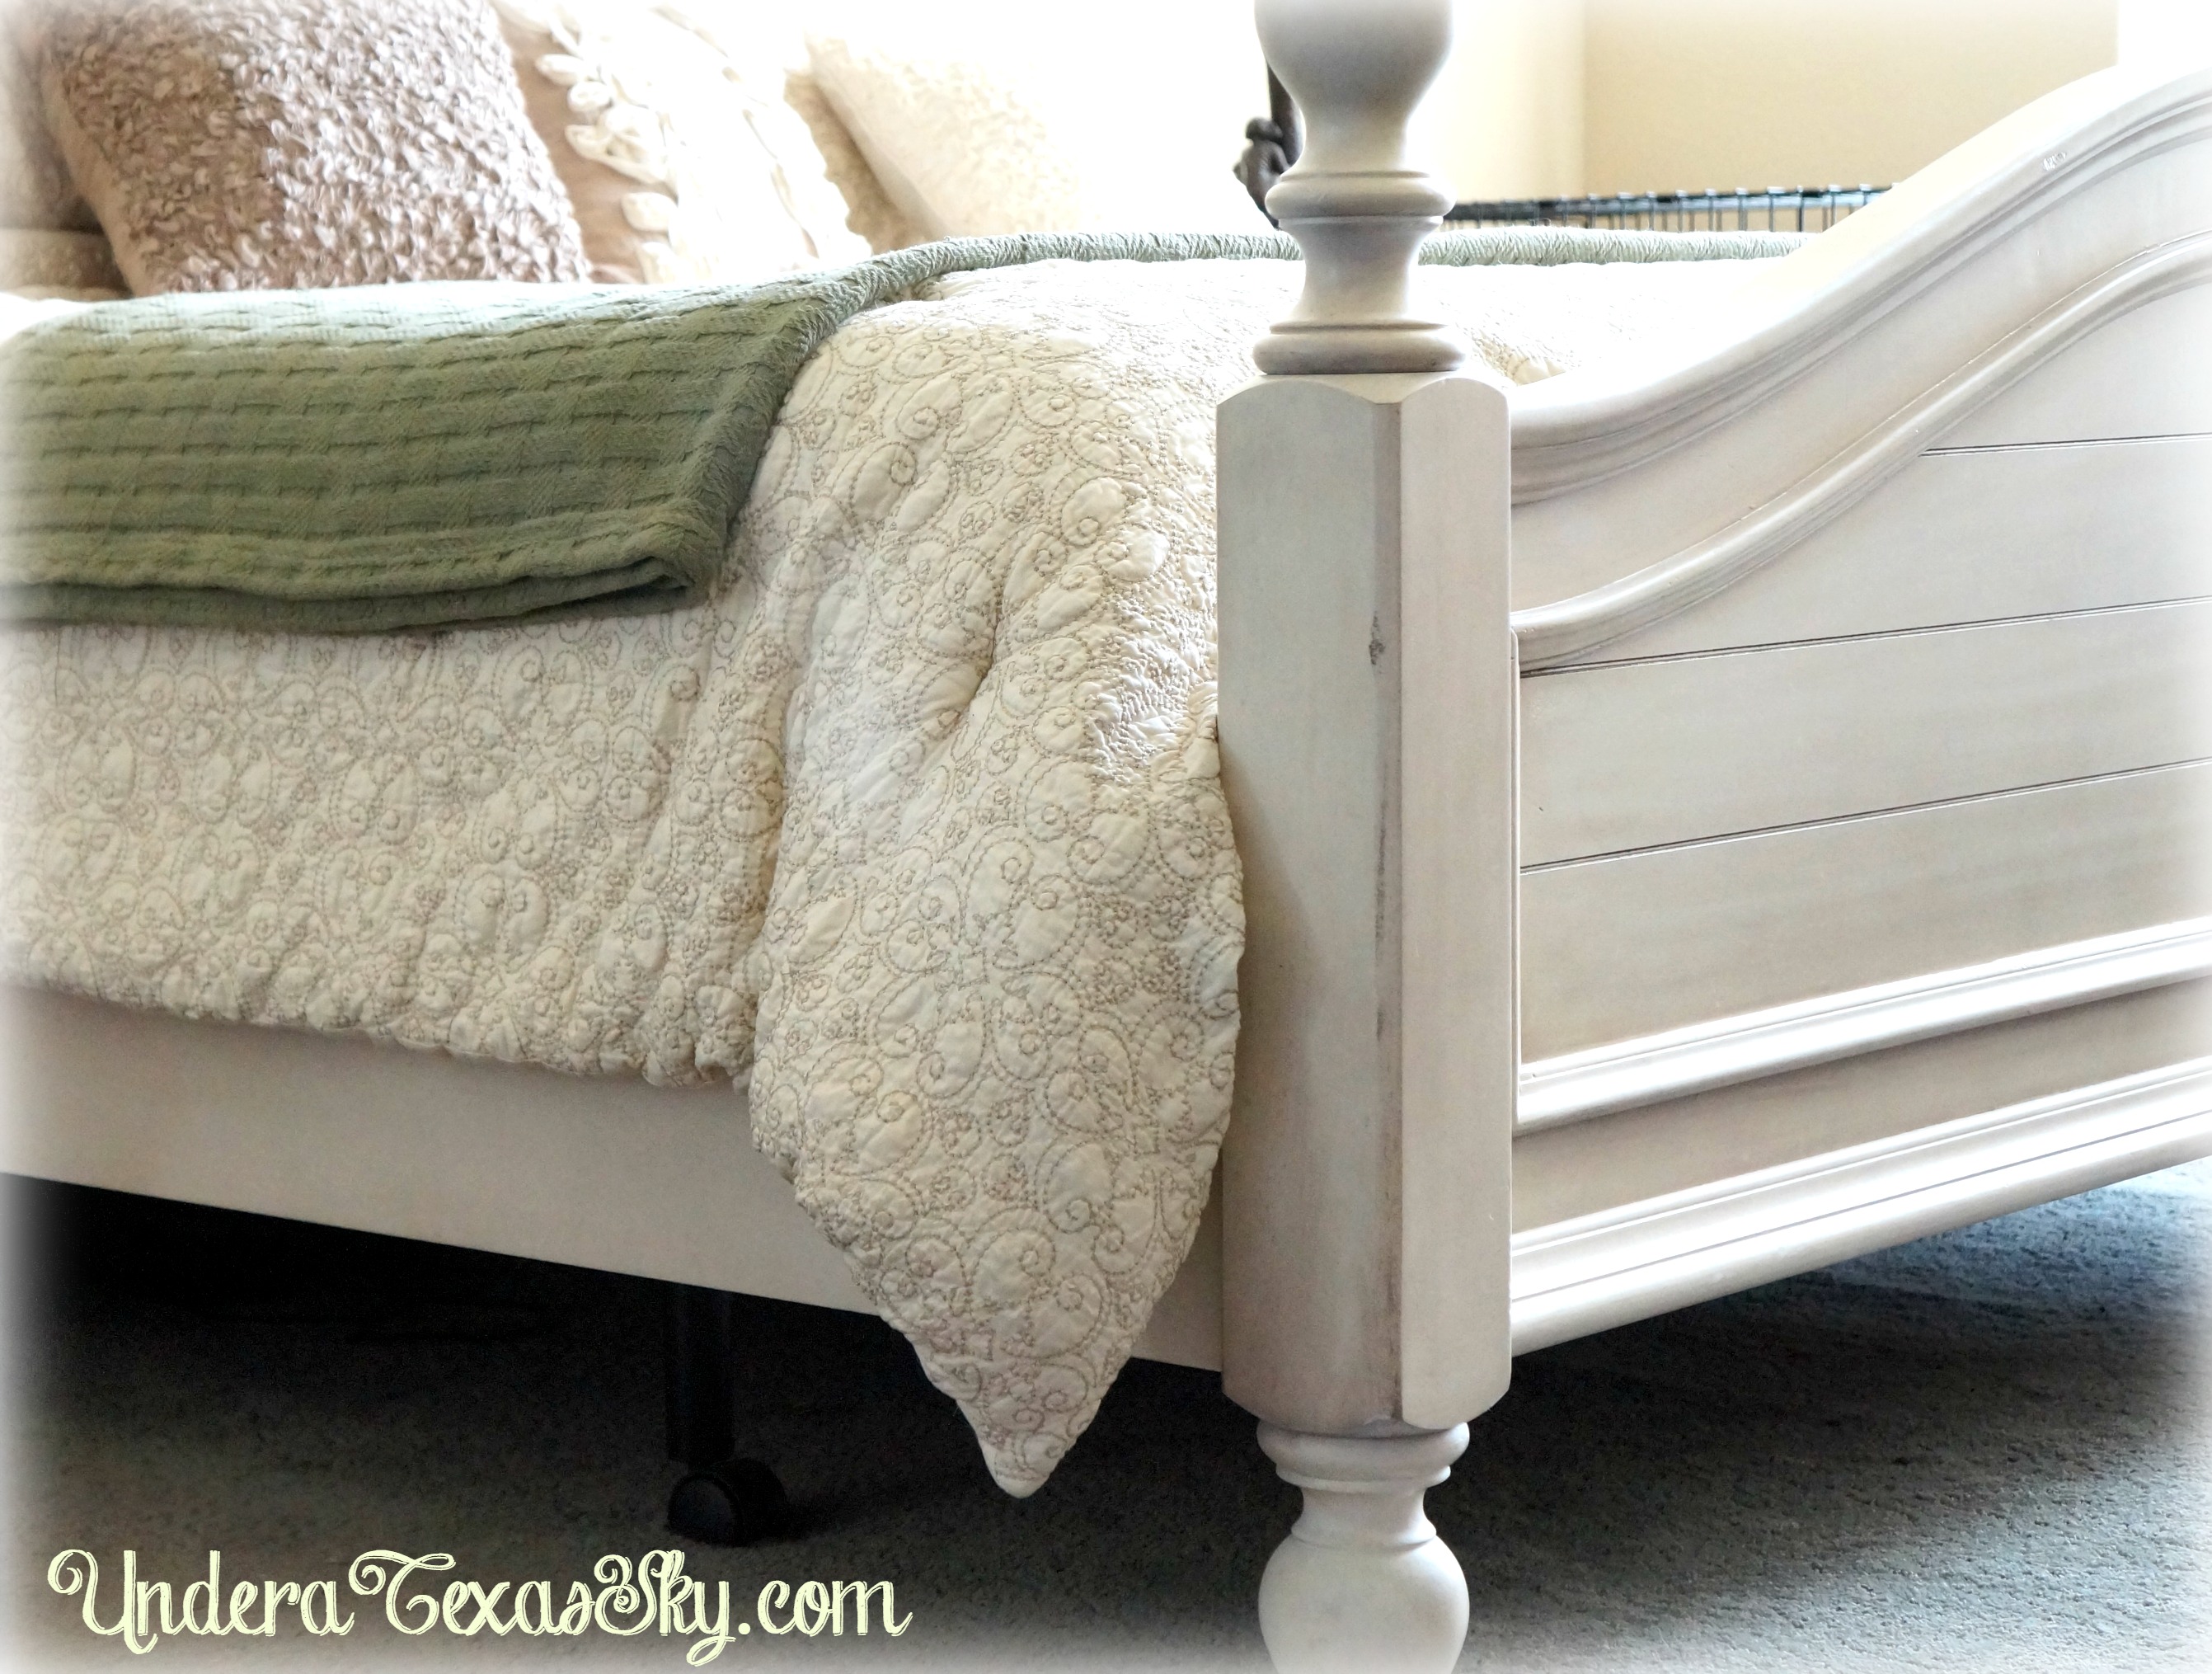 Using A Bedskirt With An Adjustable Bed, Can You Attach A Headboard And Footboard To An Adjustable Bed